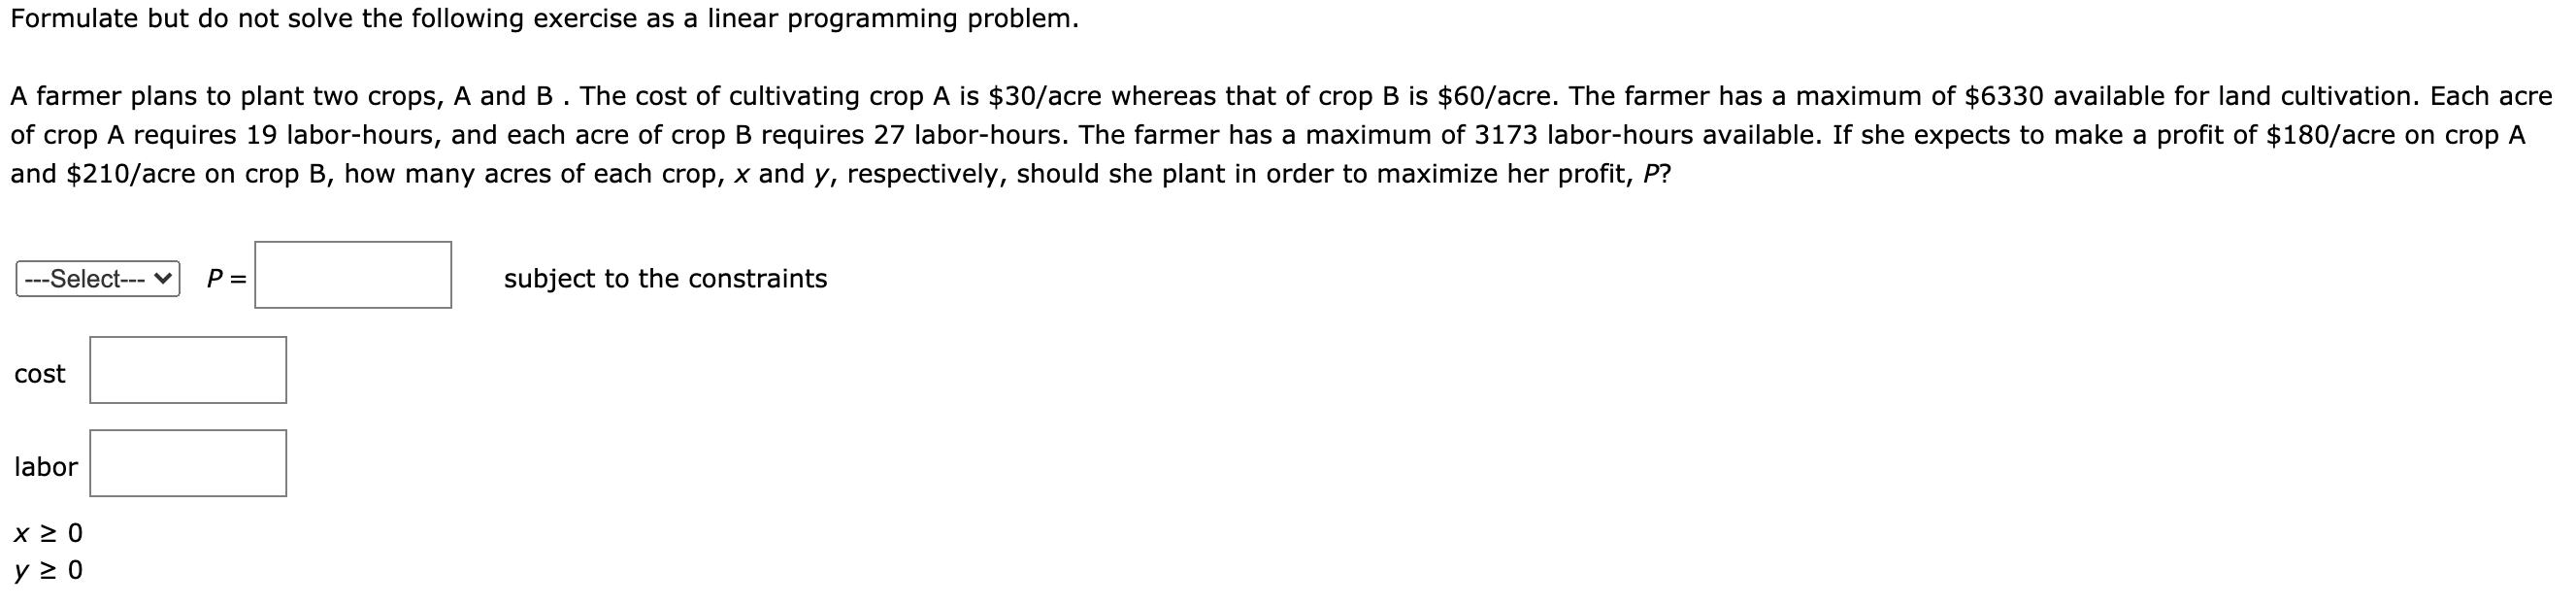 Formulate but do not solve the following exercise as a linear programming problem.
A farmer plans to plant two crops, A and B . The cost of cultivating crop A is $30/acre whereas that of crop B is $60/acre. The farmer has a maximum of $6330 available for land cultivation. Each acre
of crop A requires 19 labor-hours, and each acre of crop B requires 27 labor-hours. The farmer has a maximum of 3173 labor-hours available. If she expects to make a profit of $180/acre on crop A
and $210/acre on crop B, how many acres of each crop, x and y, respectively, should she plant in order to maximize her profit, P?
---Select--- v
P =
subject to the constraints
cost
labor
y 2 0
